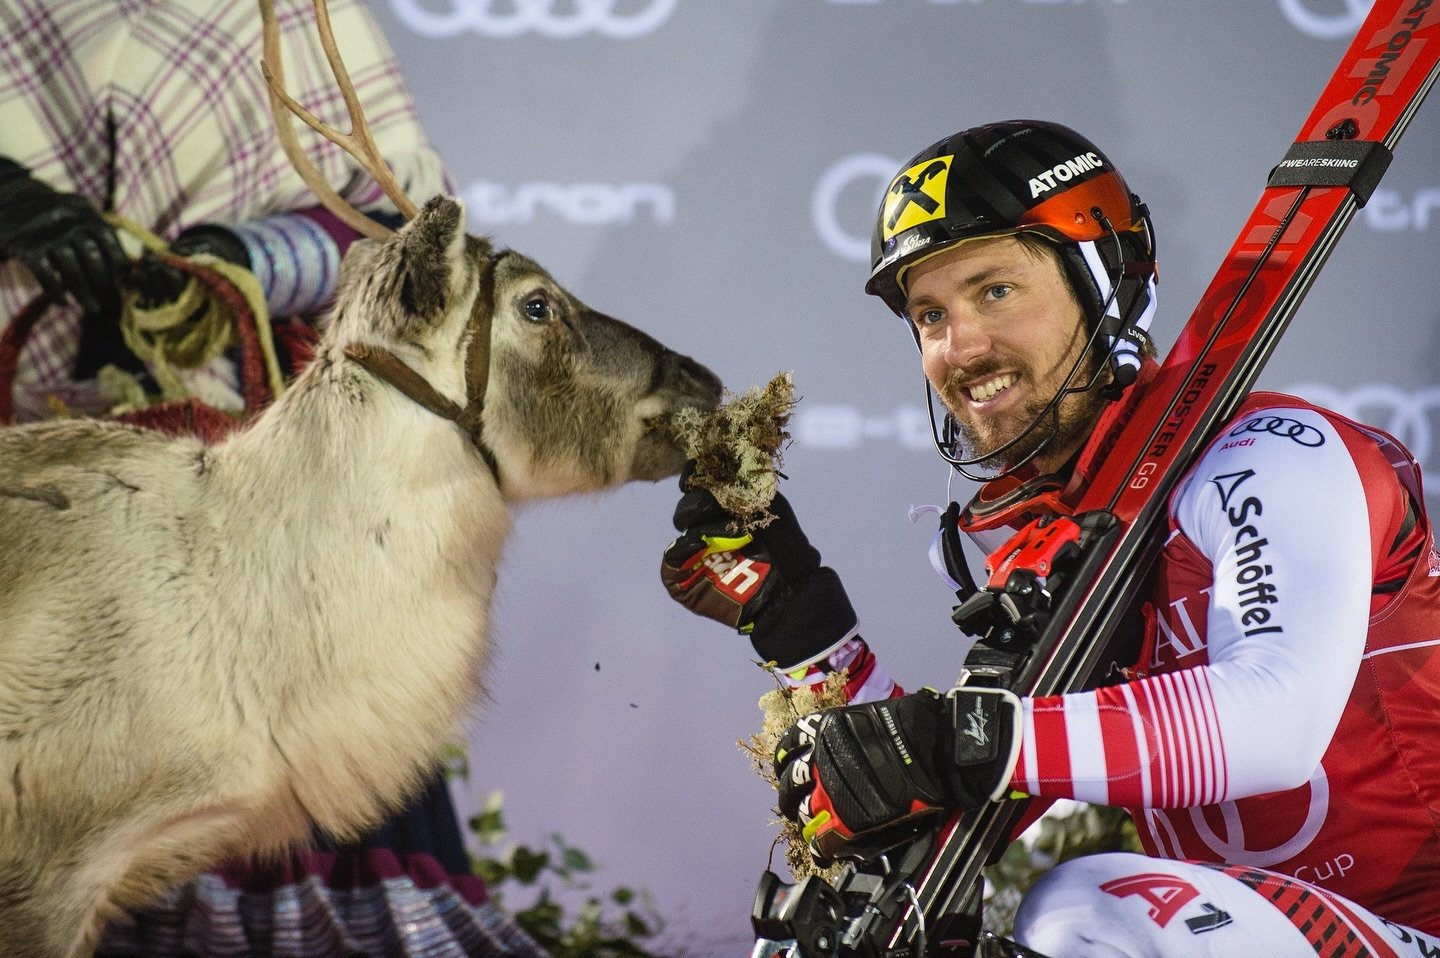 The FIS World Cup Committee has officially approved the men&rsquo;s slalom race as part of the Levi World Cup event. 🤩

&rdquo;Internationality and connection: The right signals in skiing at the right time&rdquo;, says Marcel Hirscher ⭐️

Read the p